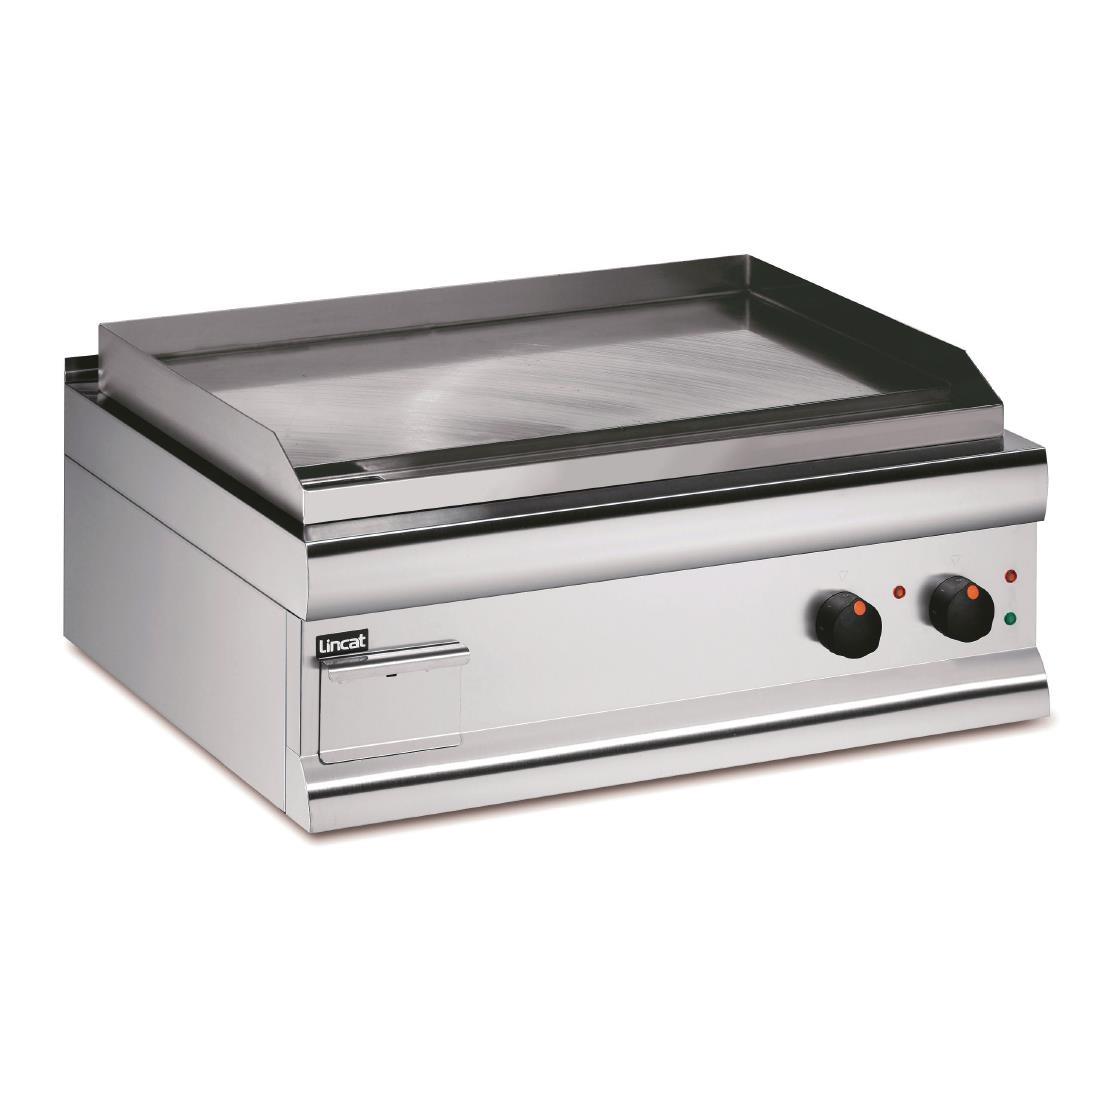 Lincat Silverlink 600 Machined Steel Electric Griddle Dual Zone 750mm Wide GS7/E - CL678  - 1